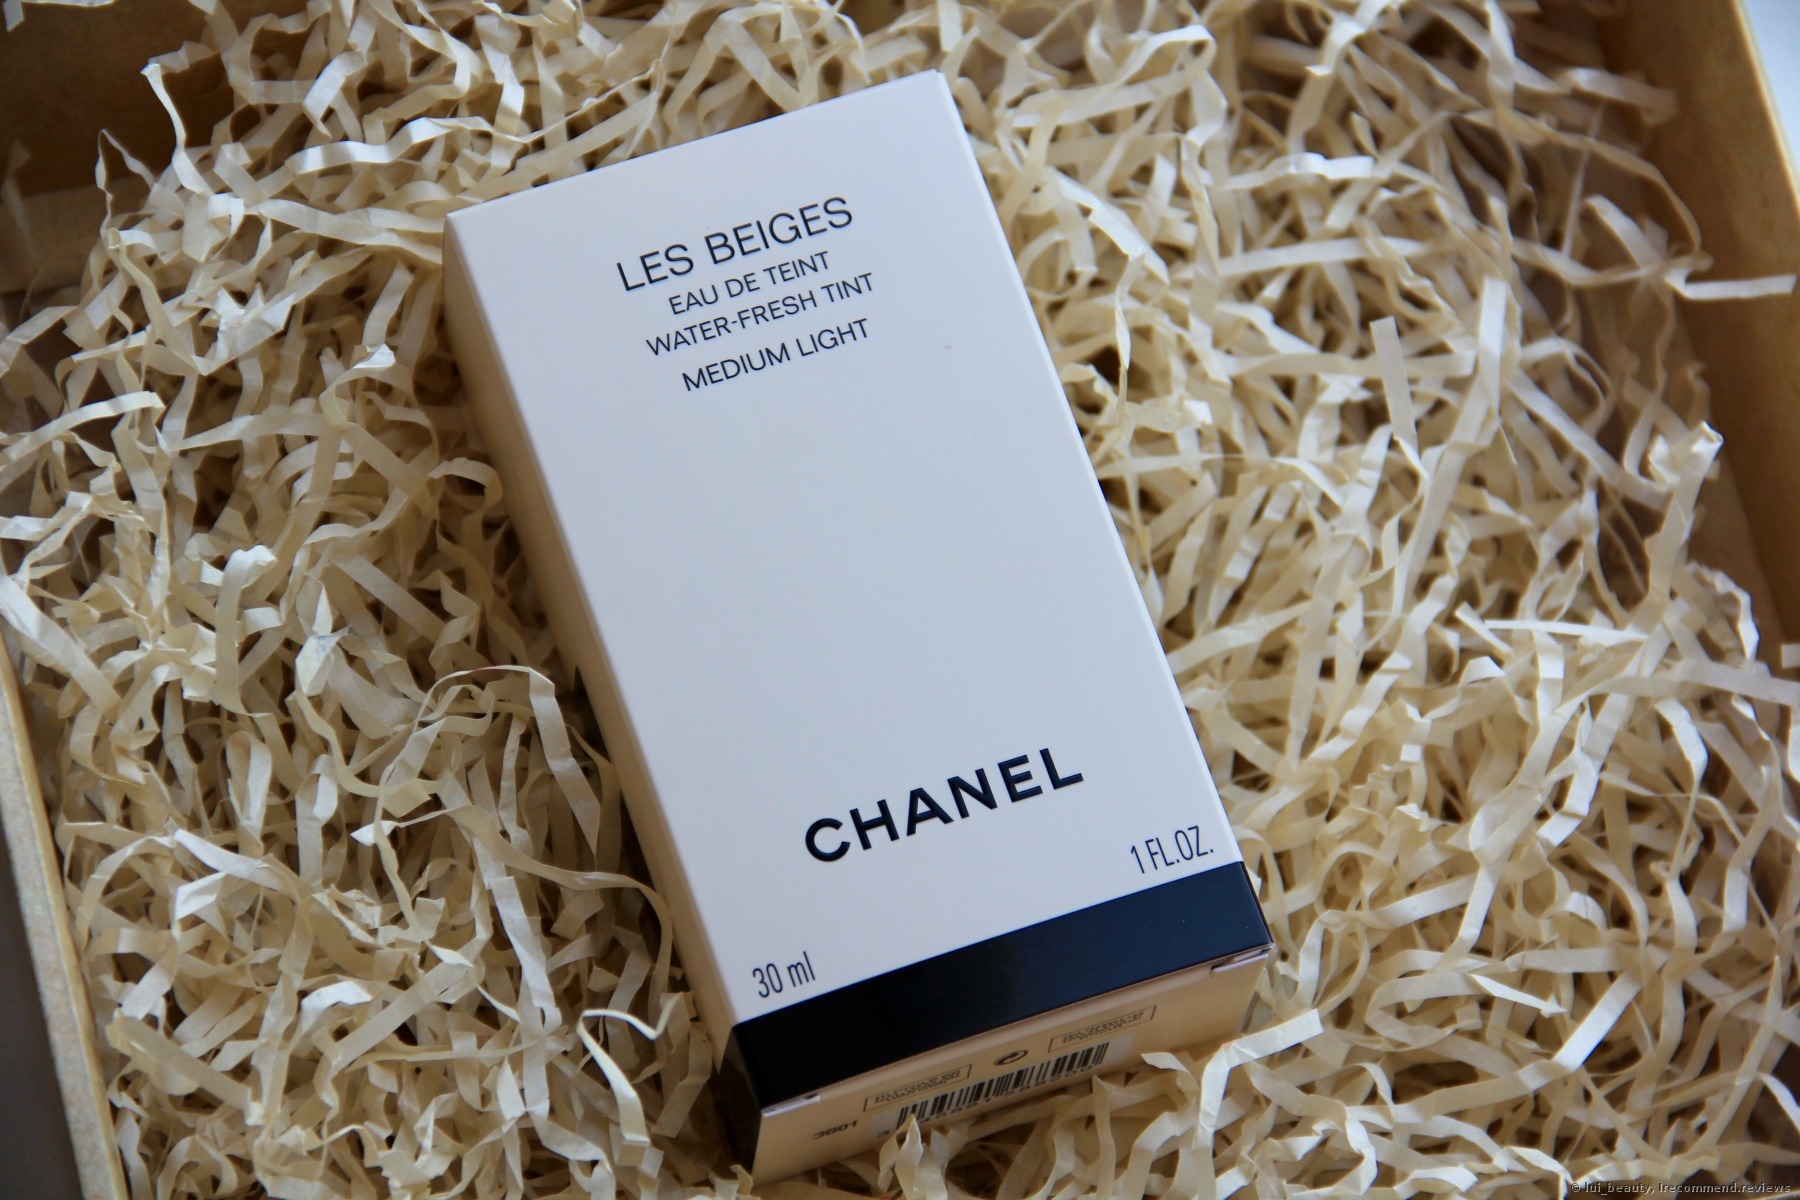 Chanel Les Beiges Water-Fresh Tint - «The most lightweight water for your  face. My review of Chanel Les Beiges Eau de Teint water-fresh tint. Is it  worth the money it costs? The